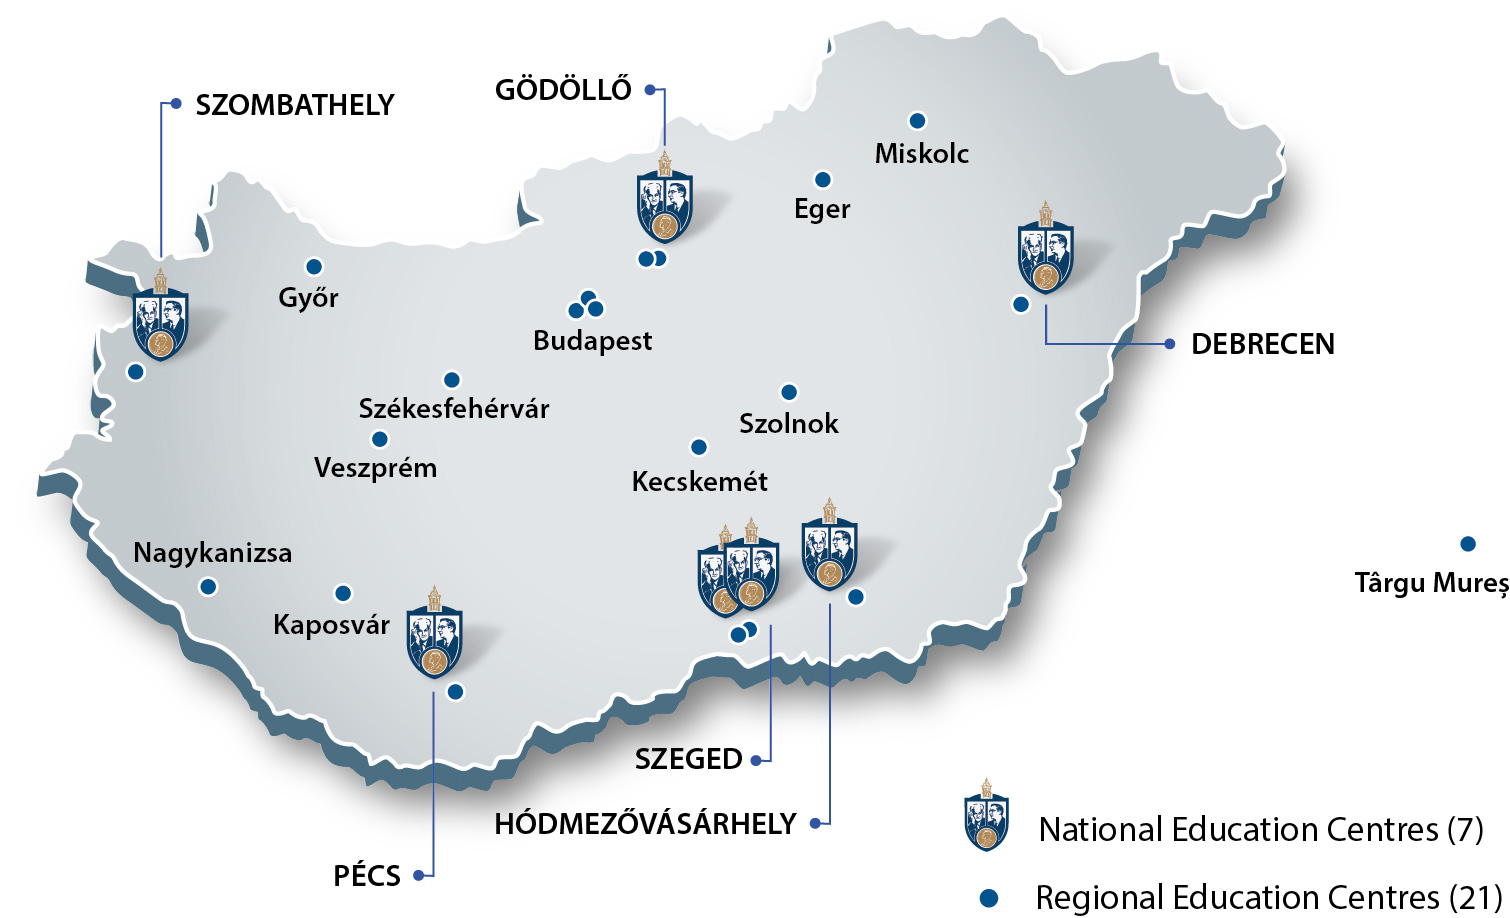 The 7 National and the 21 Regional Education Centres